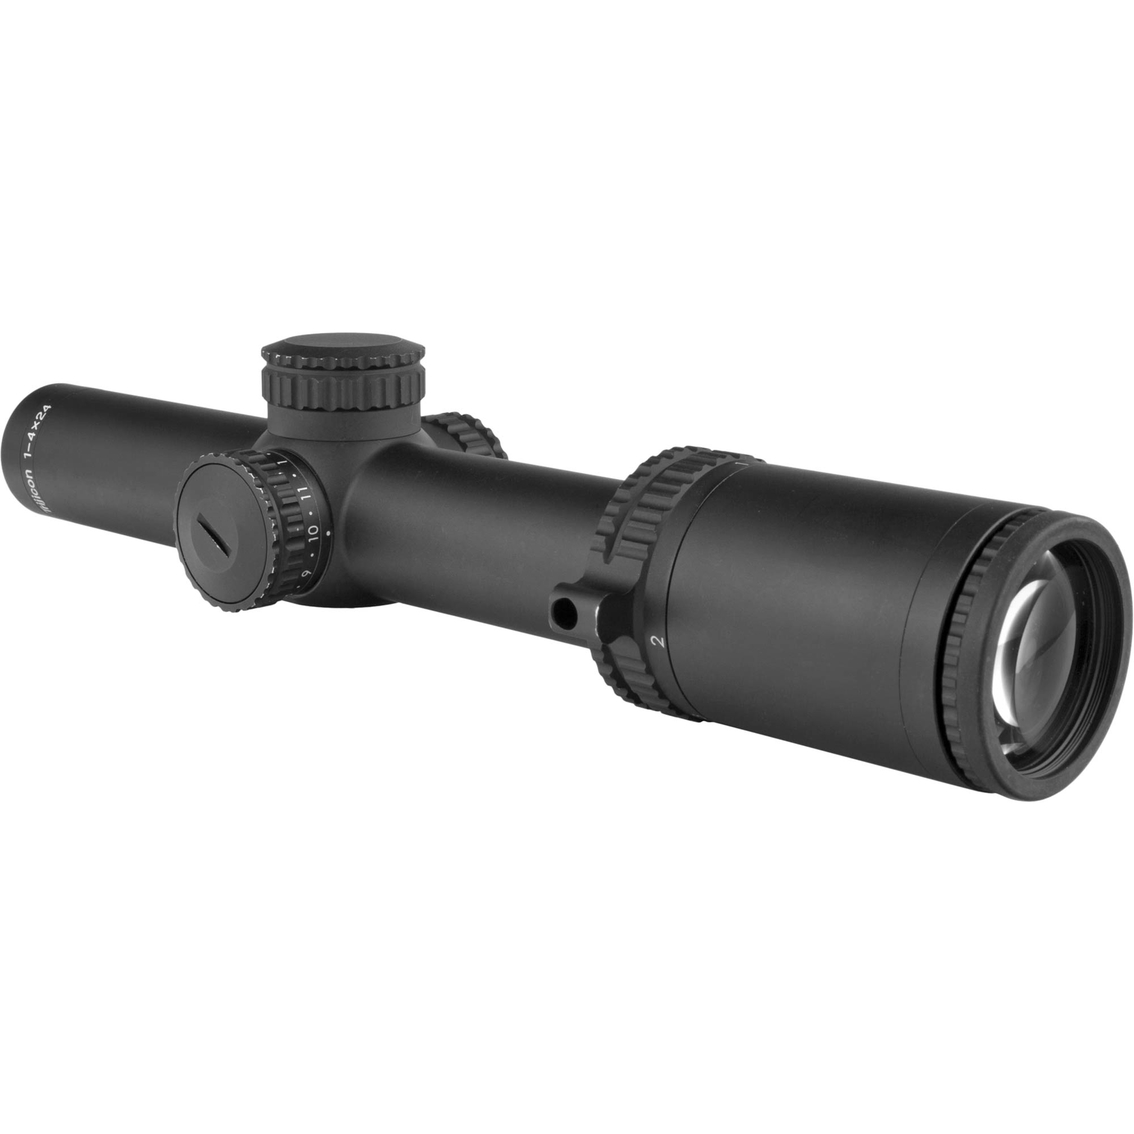 Trijicon AccuPower 1-4x24 SG-C/D Red Riflescope - Image 2 of 4